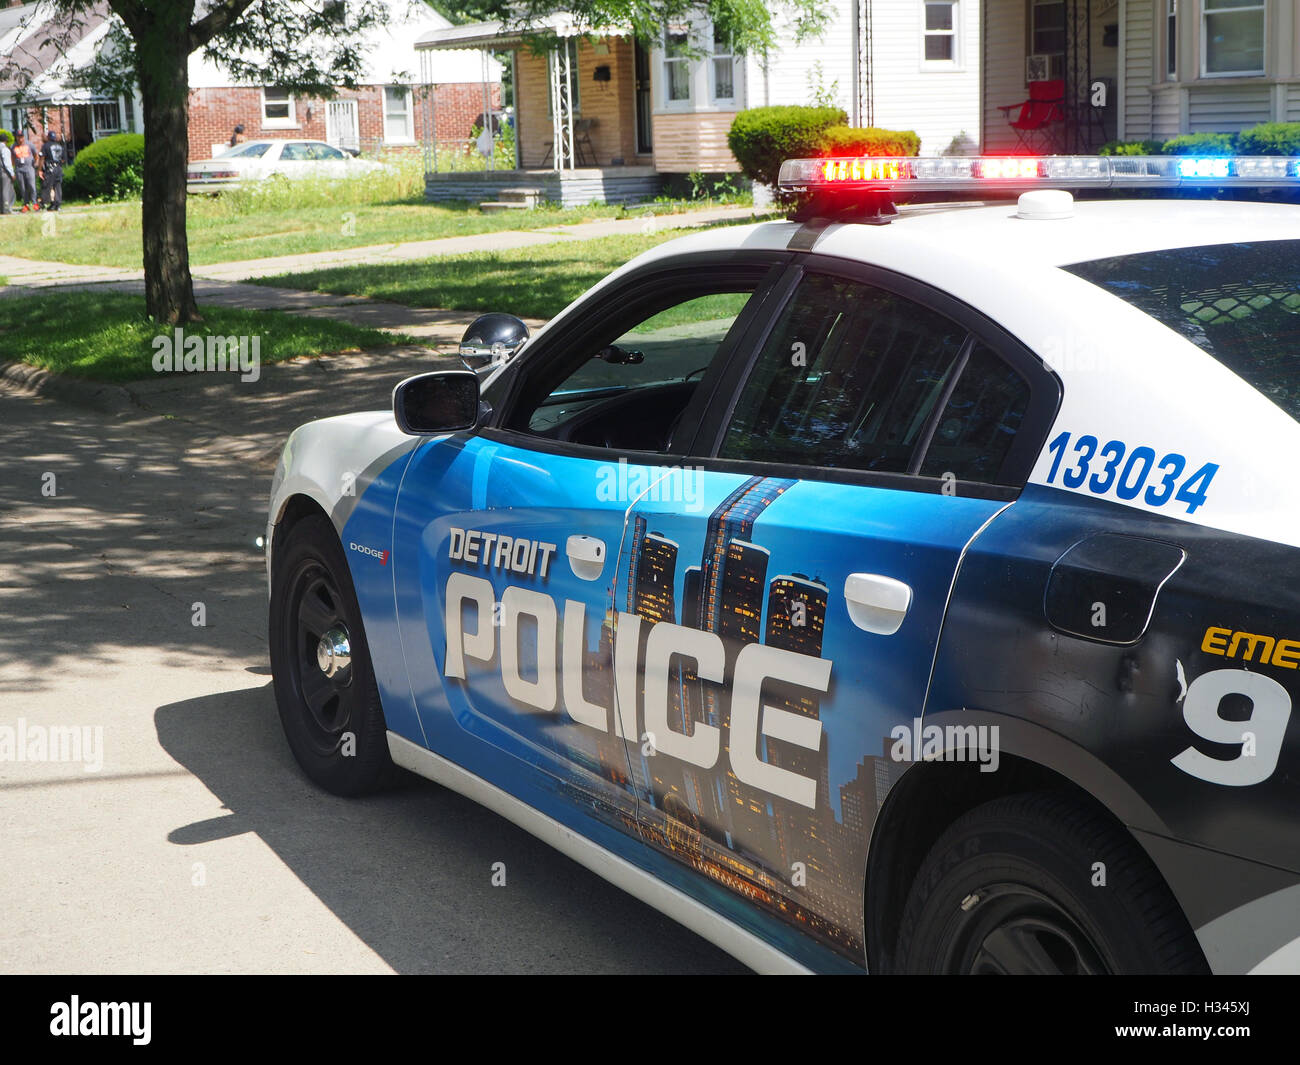 Detroit Police Department car at the scene of a homicide, Detroit, MIchigan, USA Stock Photo